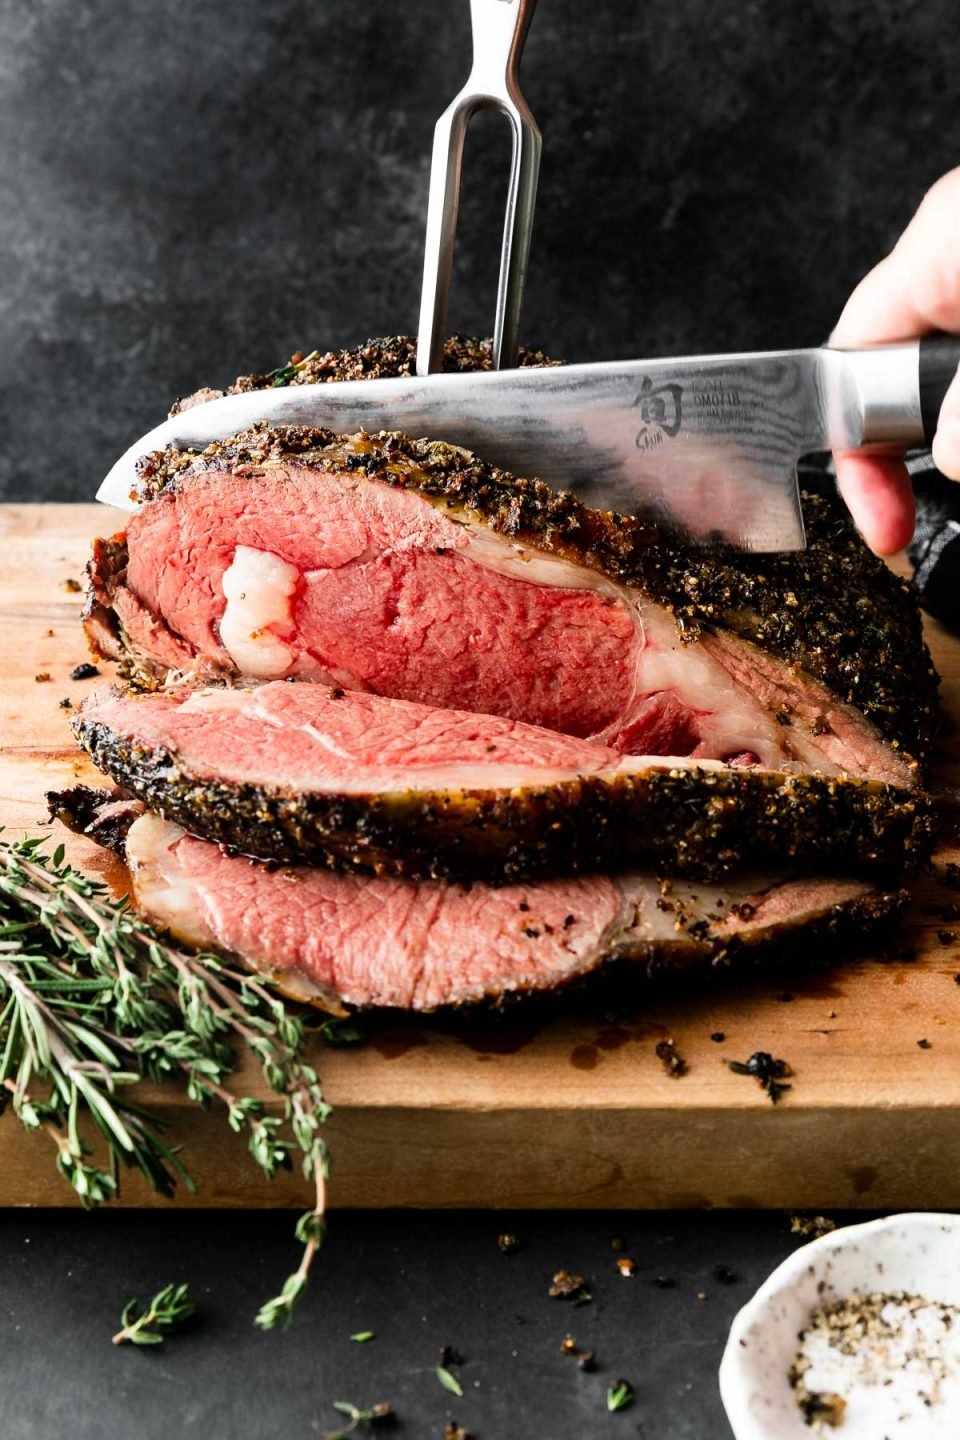 A side angle shot of roasted and partially carved medium-rare Prime Rib covered in a Garlic Herb Rub that sits atop a wooden cutting board. A woman's hand holds a sharp kitchen knife in one hand as it slices through the roast, while a carving fork stabilizes the prime rib roast behind the knife. The cutting board rests atop a dark textured surface with a black and white plaid linen napkin resting in the background & fresh herbs, and a pinch bowl filled with kosher salt and black pepper surrounding the prime rib roast. The items are set against a dark textured background.